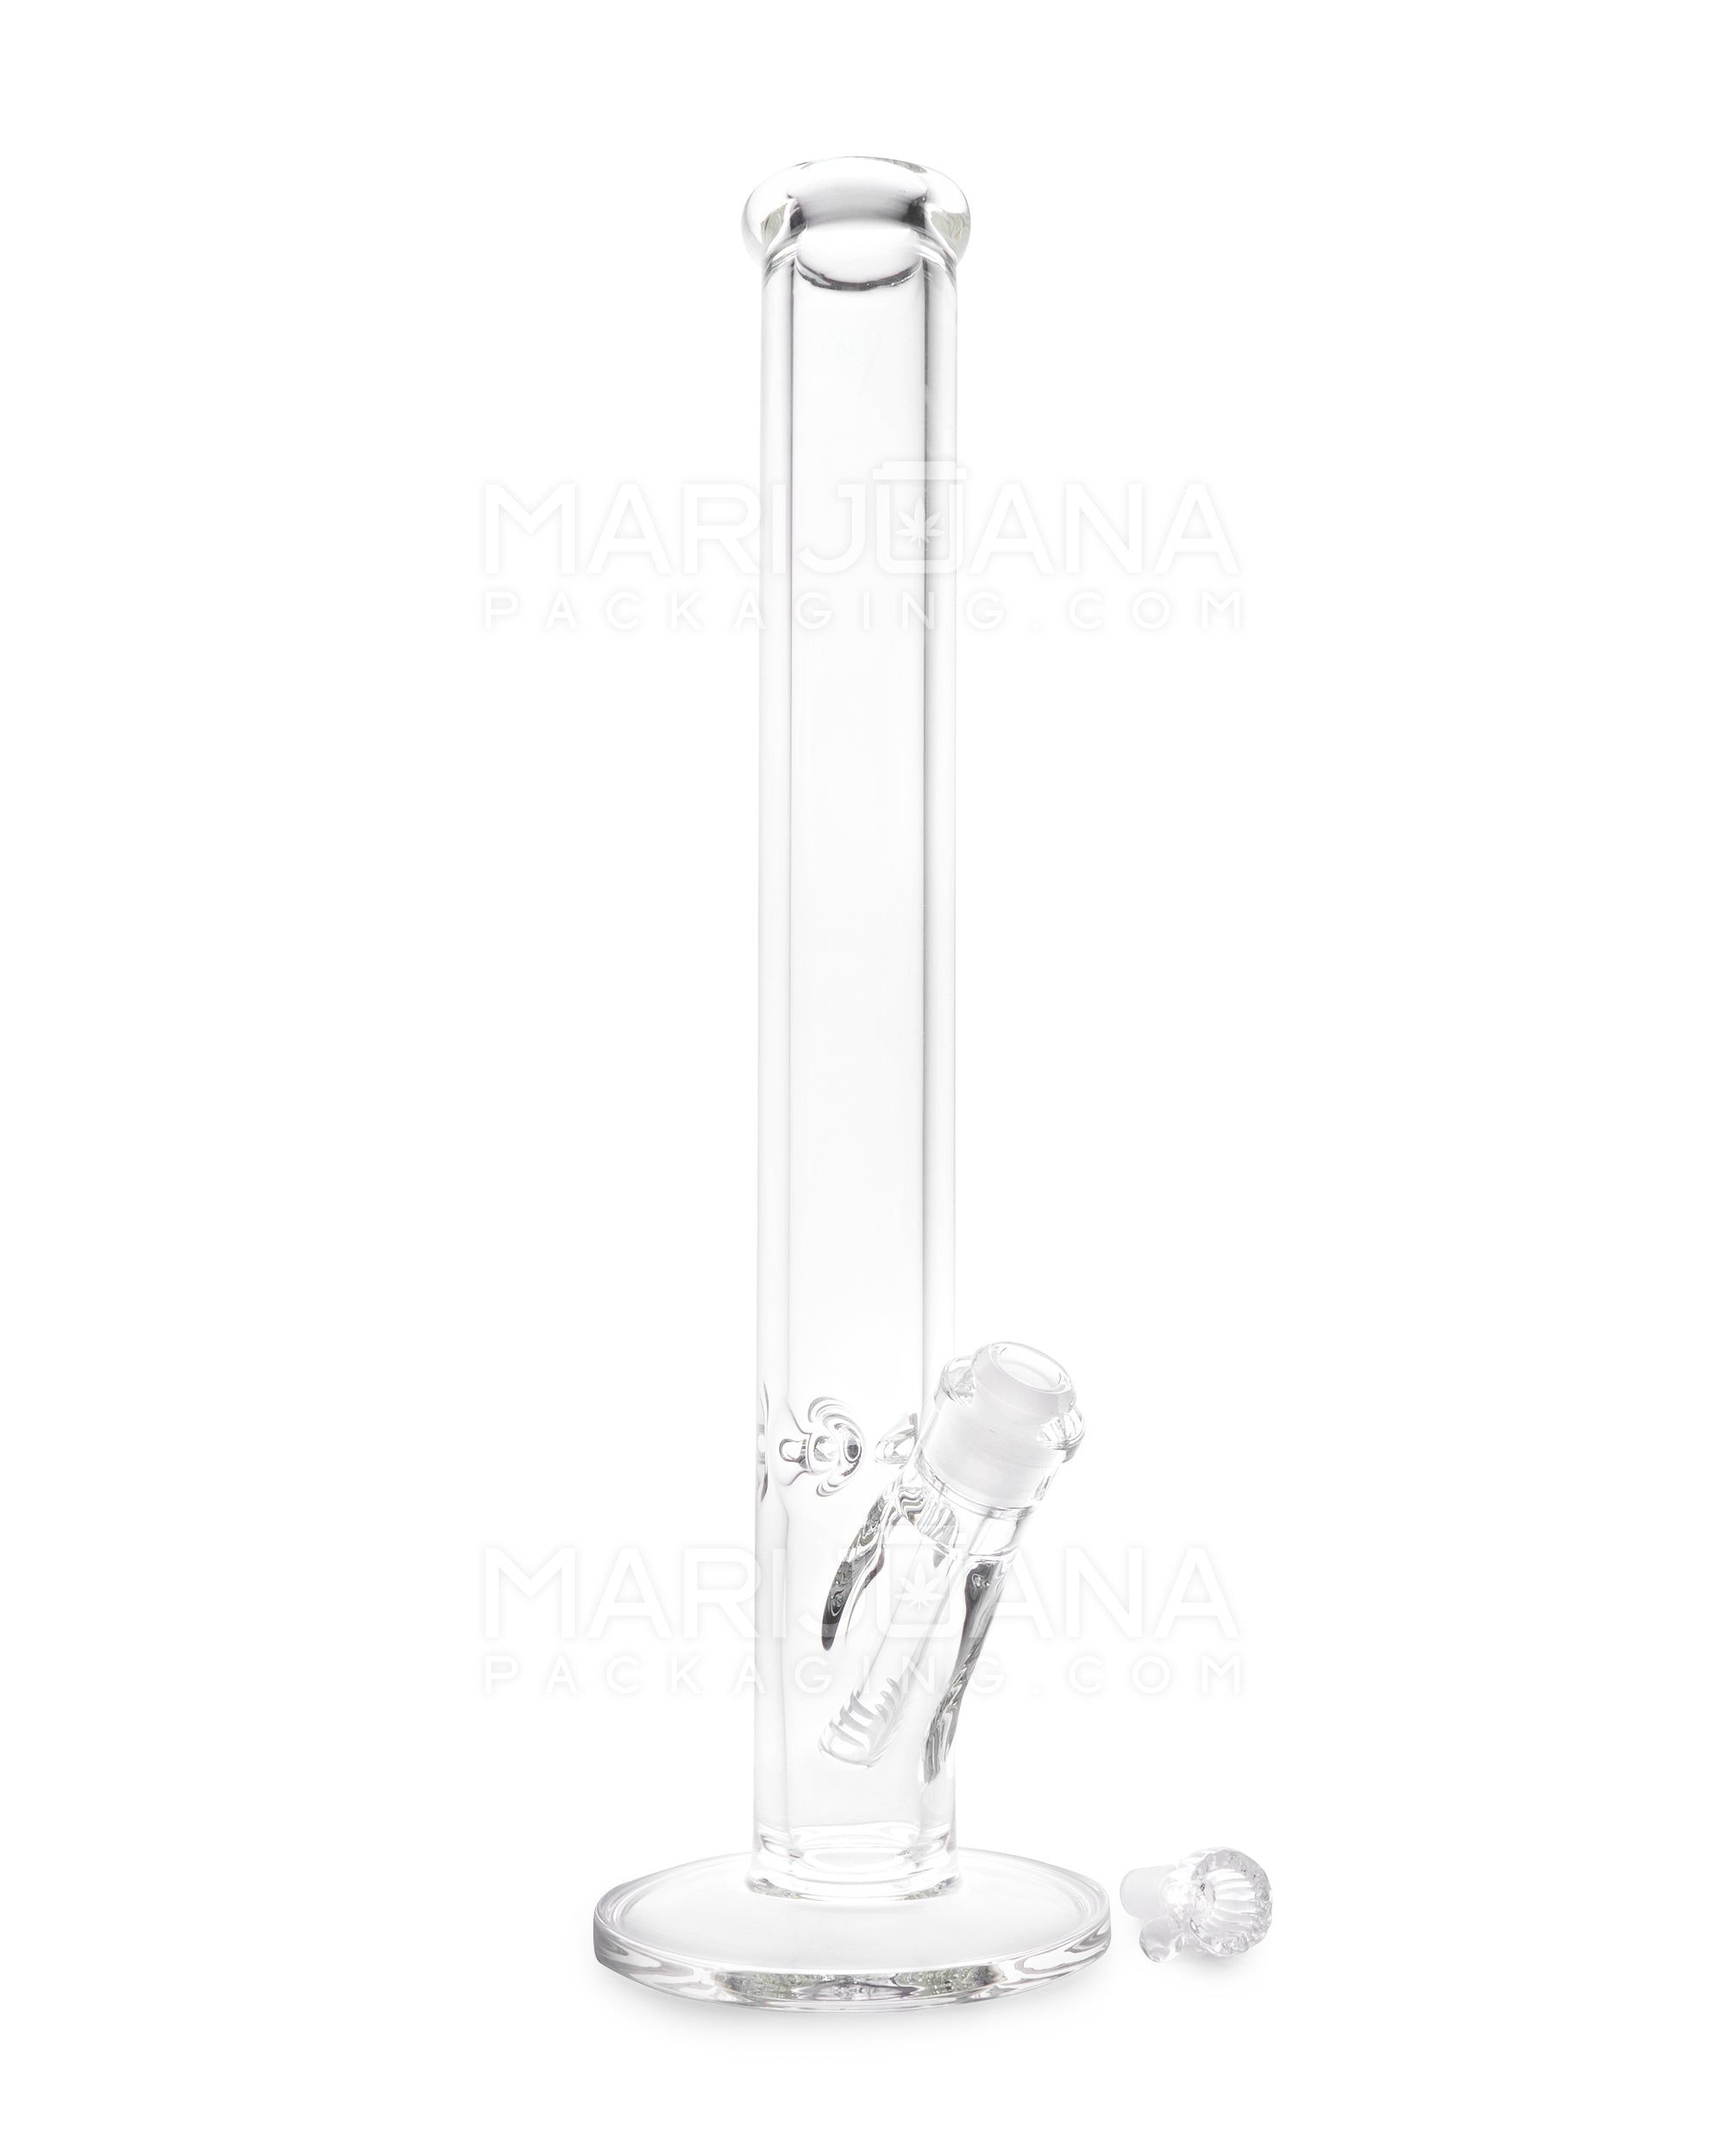 USA Glass | Straight Neck Heavy Thick Glass Water Pipe w/ Ice Catcher | 18in Tall - 14mm Bowl - Clear